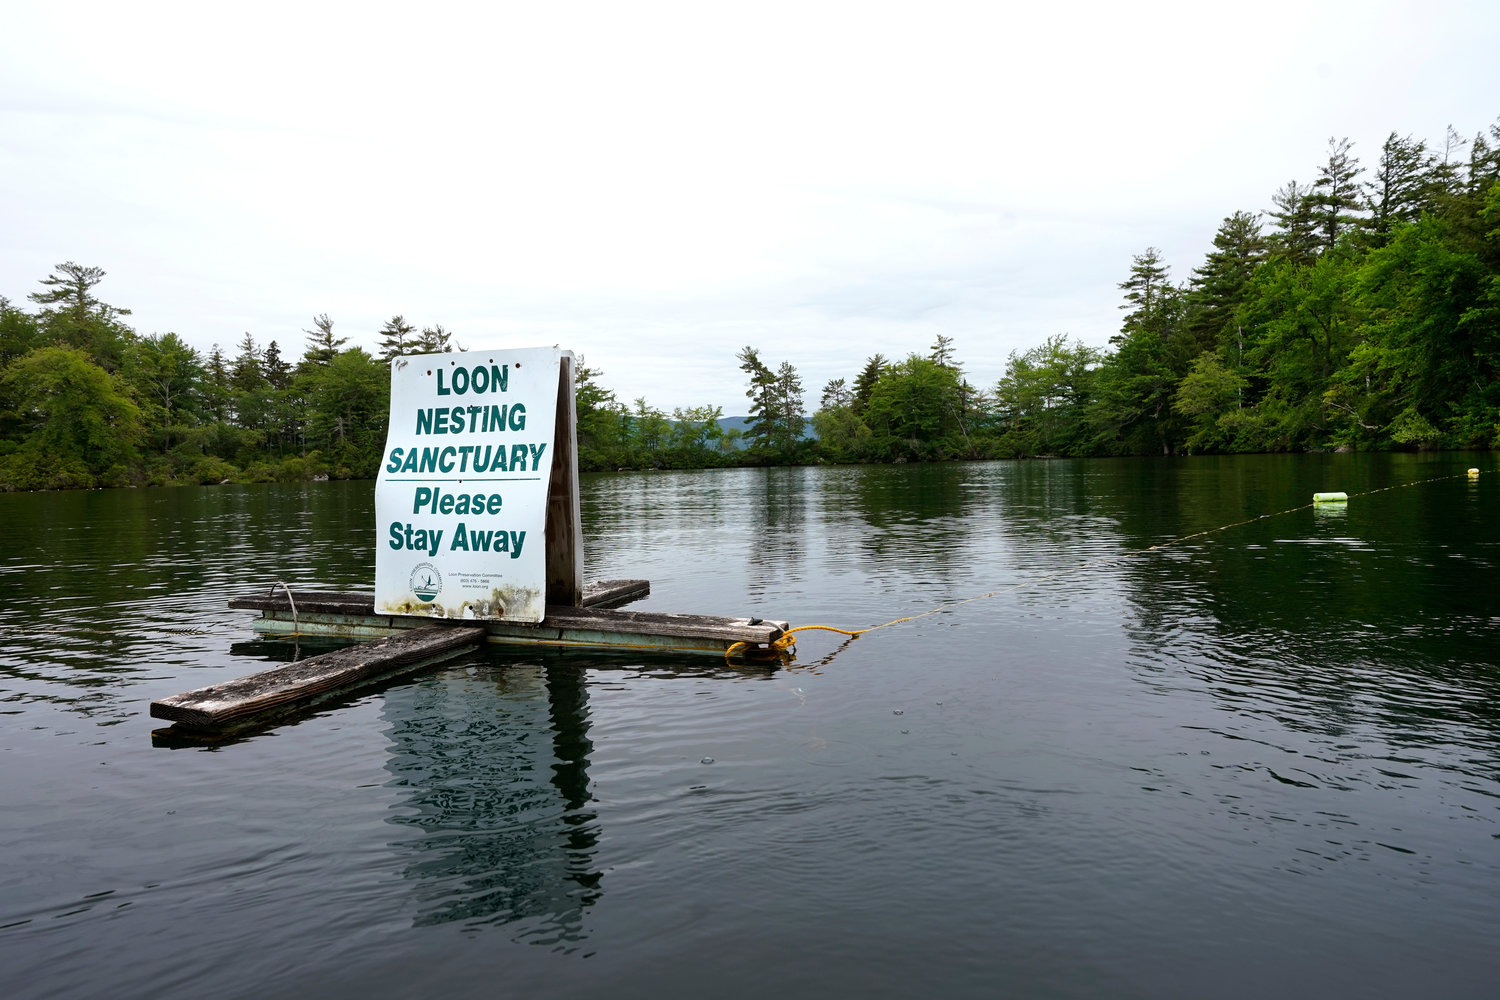 A sign designating a "Loon Nesting Sanctuary" floats on Squam Lake, Friday, June 25, 2021, in Holderness, N.H. Researchers in New Hampshire have long struggled to understand why loon numbers have stagnated on the lake, despite a robust effort to protect them. They are investigating whether contamination from PCBs could be impacting reproduction and believe oil laced with the chemicals was used on nearby dirt roads decades ago. (AP Photo/Elise Amendola)